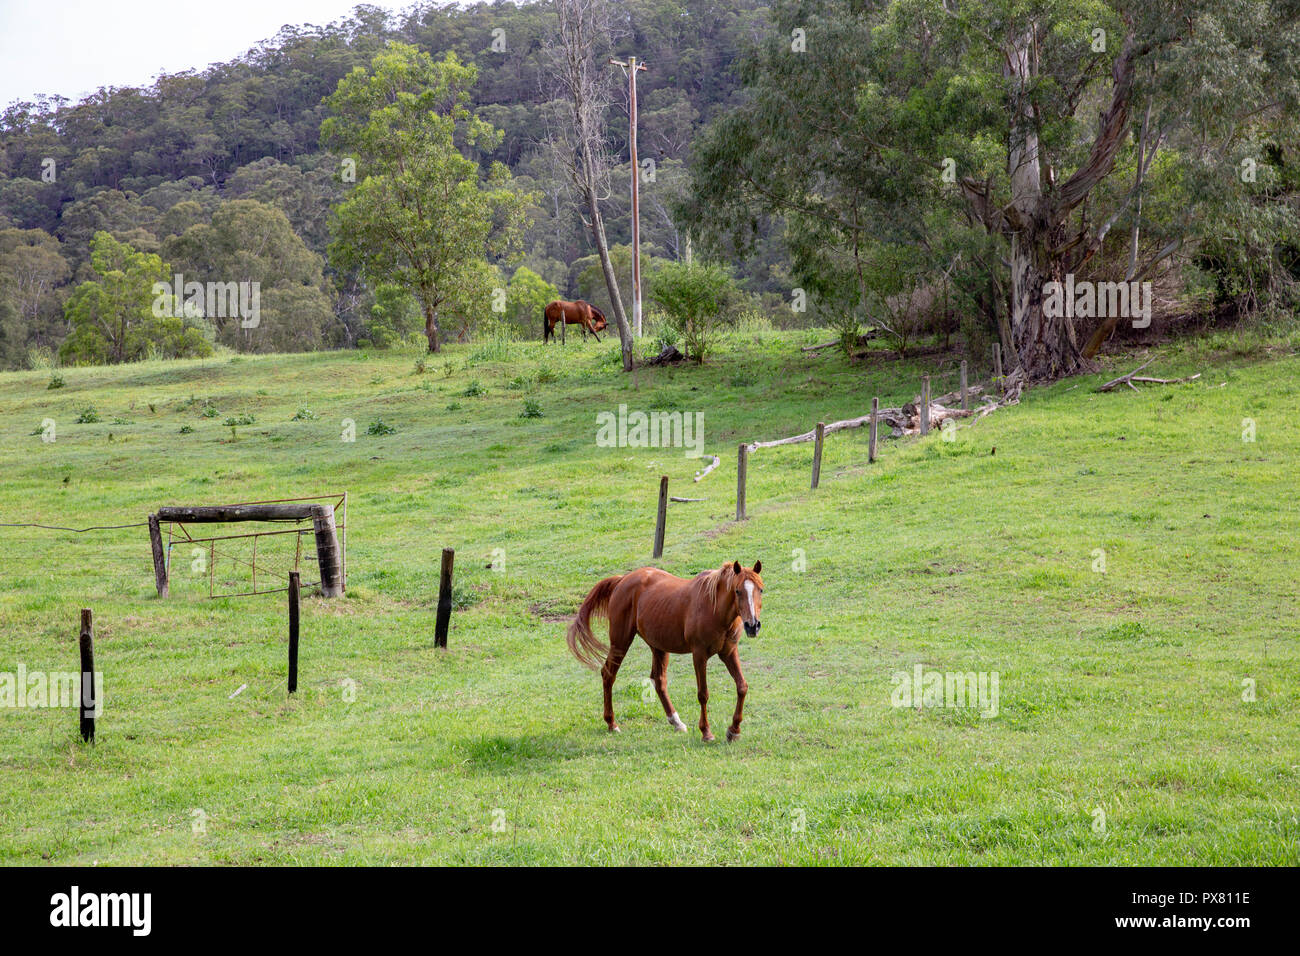 Countryside and horse in a field around the Colo River in regional New South Wales,Australia Stock Photo